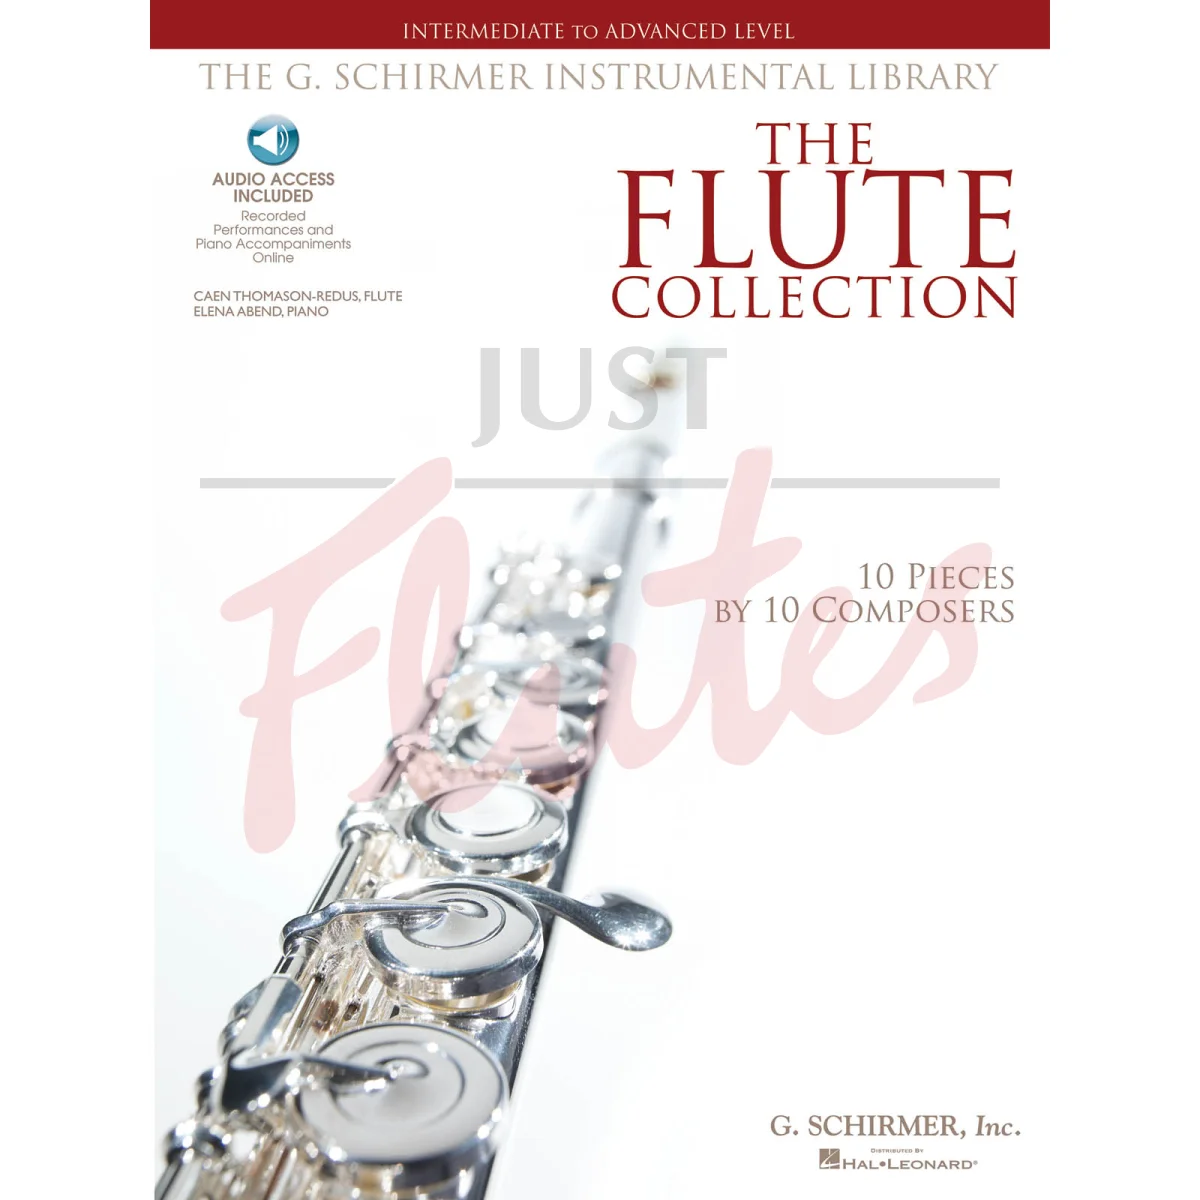 The Flute Collection - Intermediate to Advanced Level